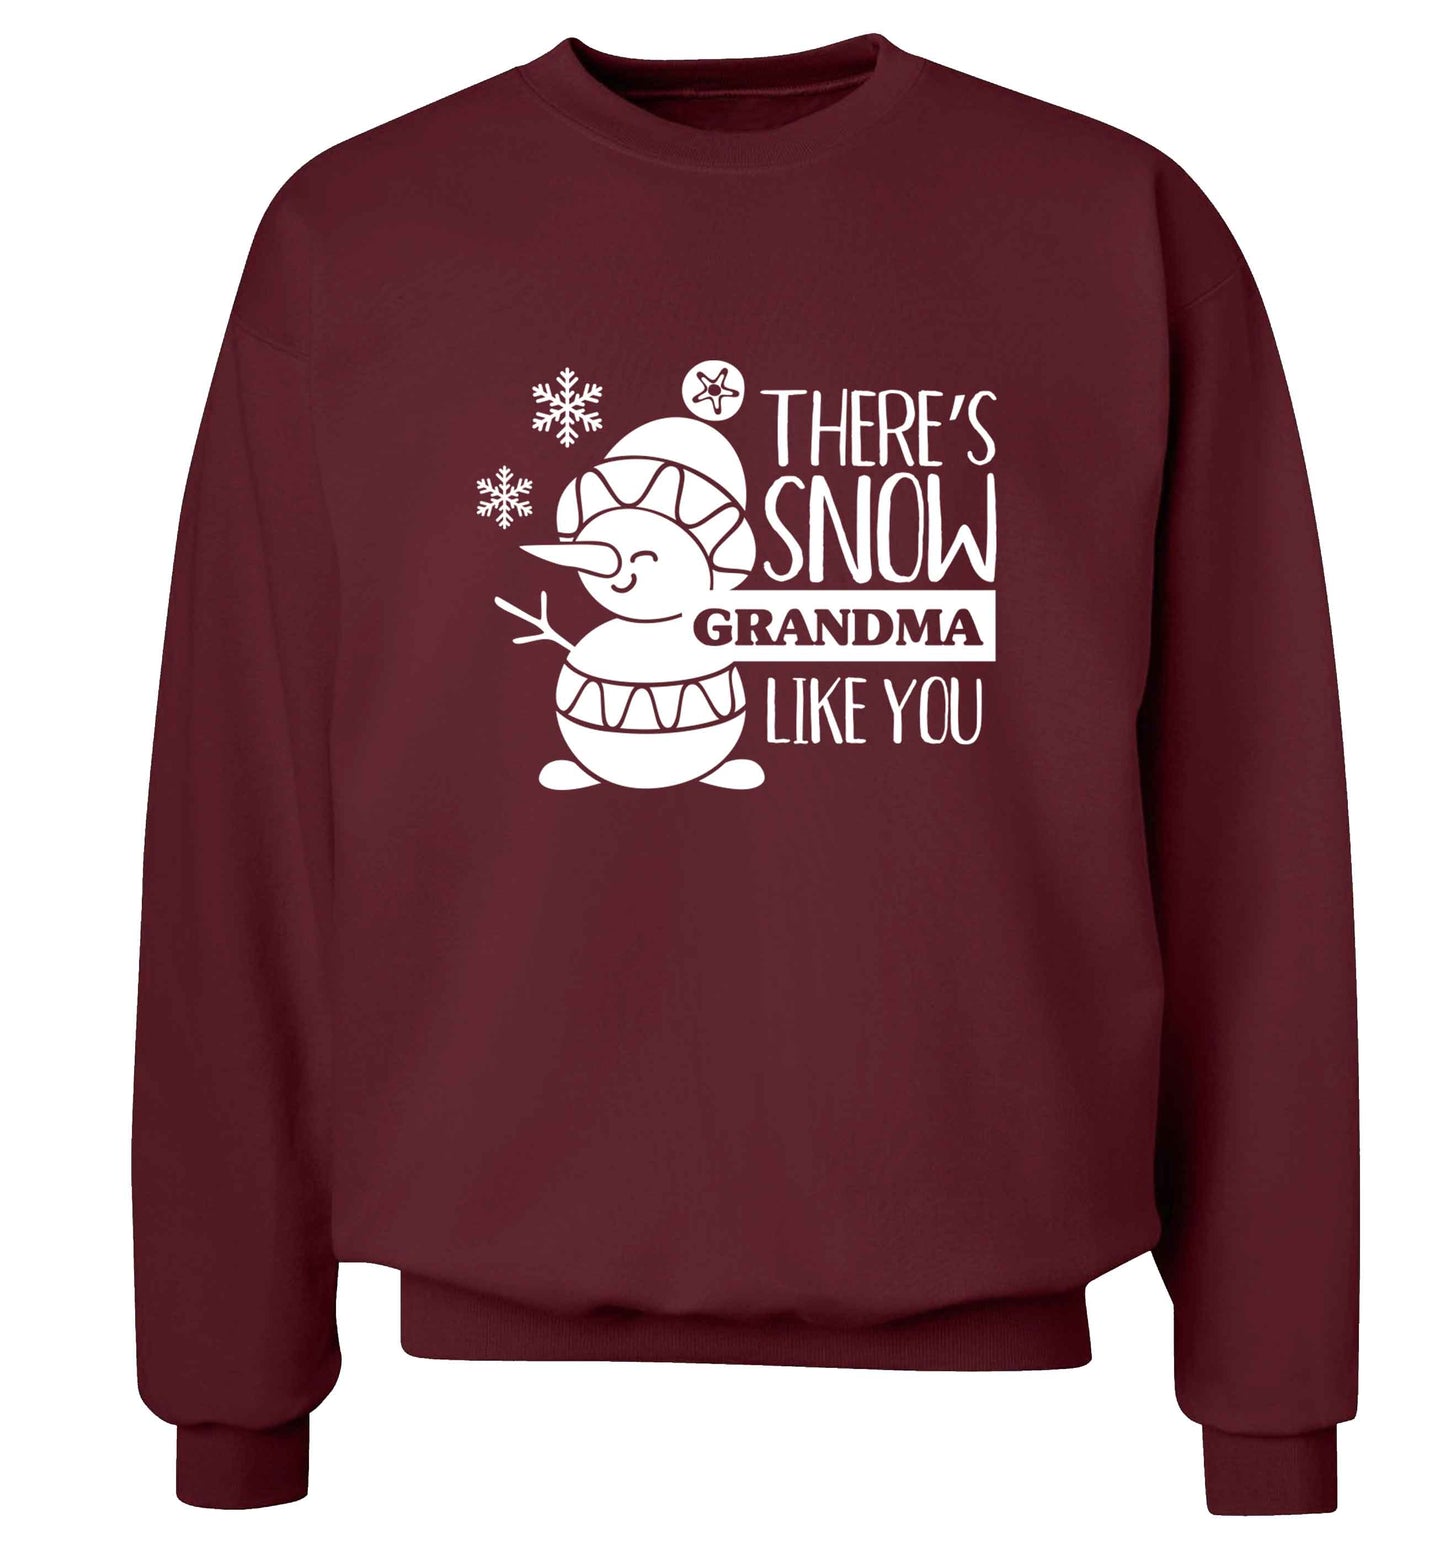 There's snow grandma like you adult's unisex maroon sweater 2XL